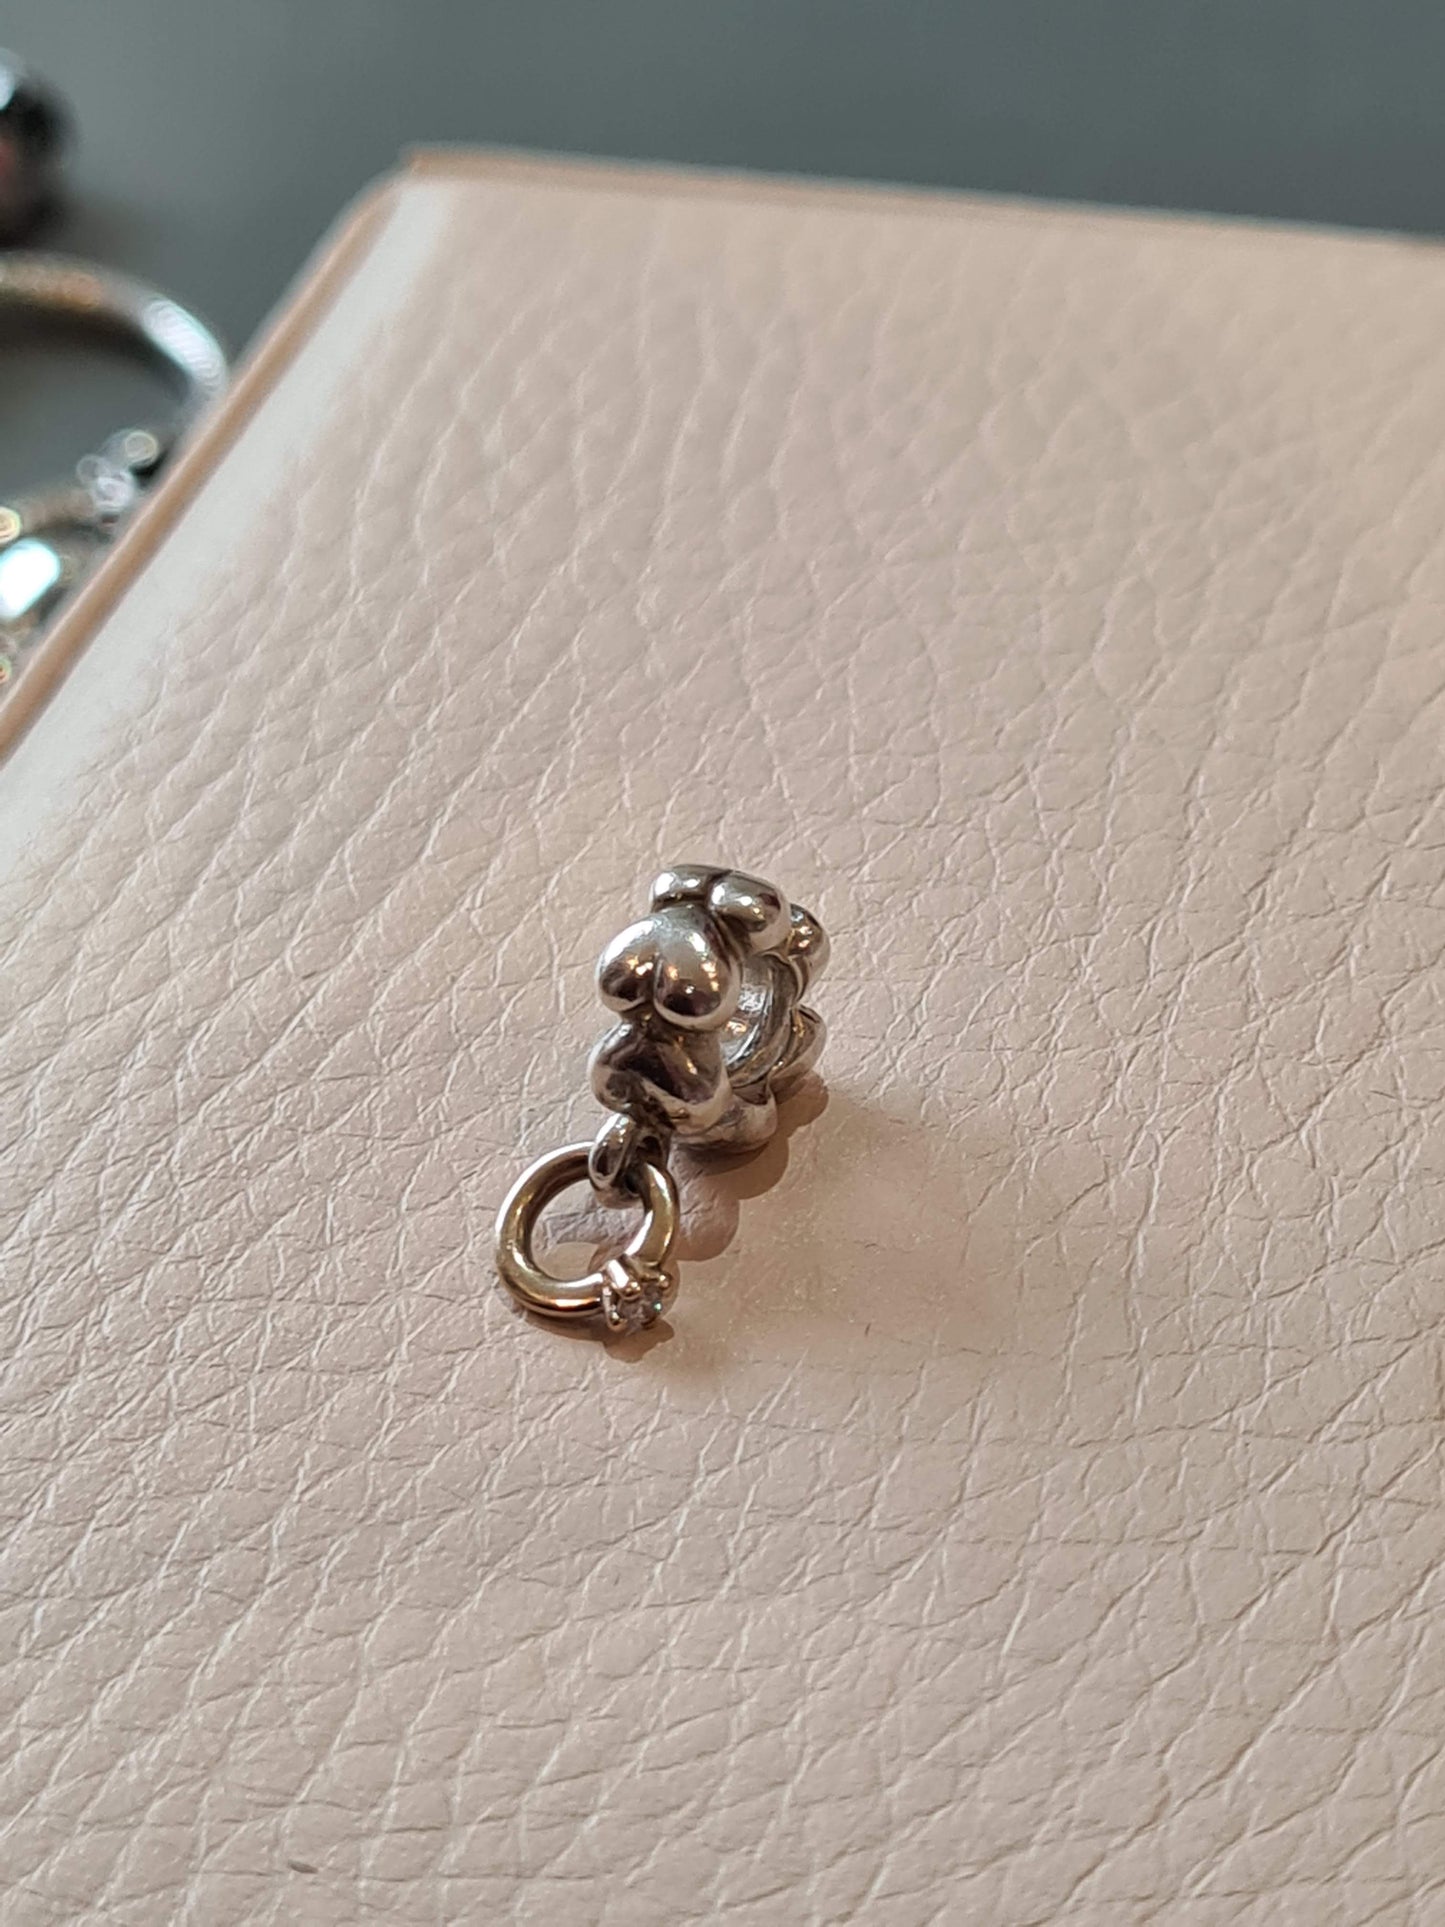 Genuine Pandora 'I Do' Engagement Ring in Gold with Small Diamond Dangle Charm